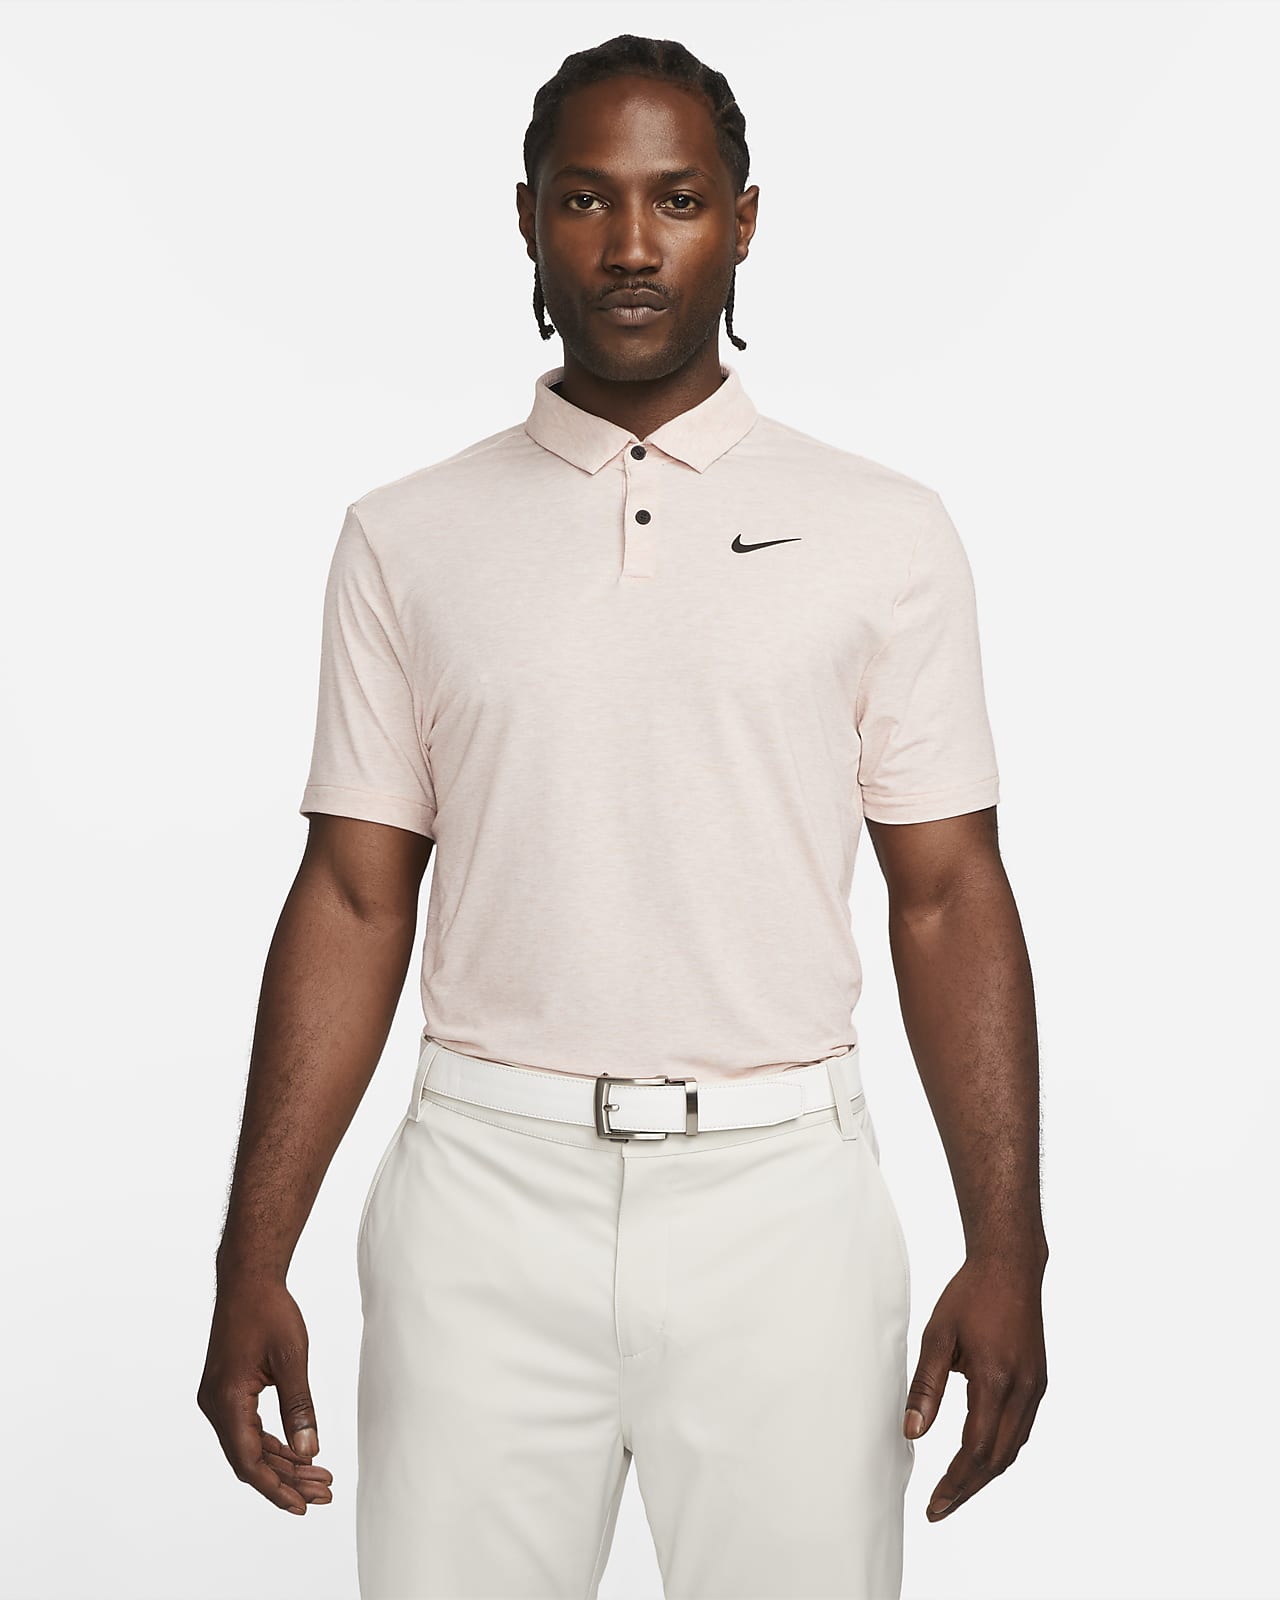 https://static.nike.com/a/images/t_PDP_1280_v1/f_auto,q_auto:eco/3241b70b-dbf9-4270-9237-2e31356c00ce/polo-de-golf-dri-fit-tour-pour-thtWpr.png